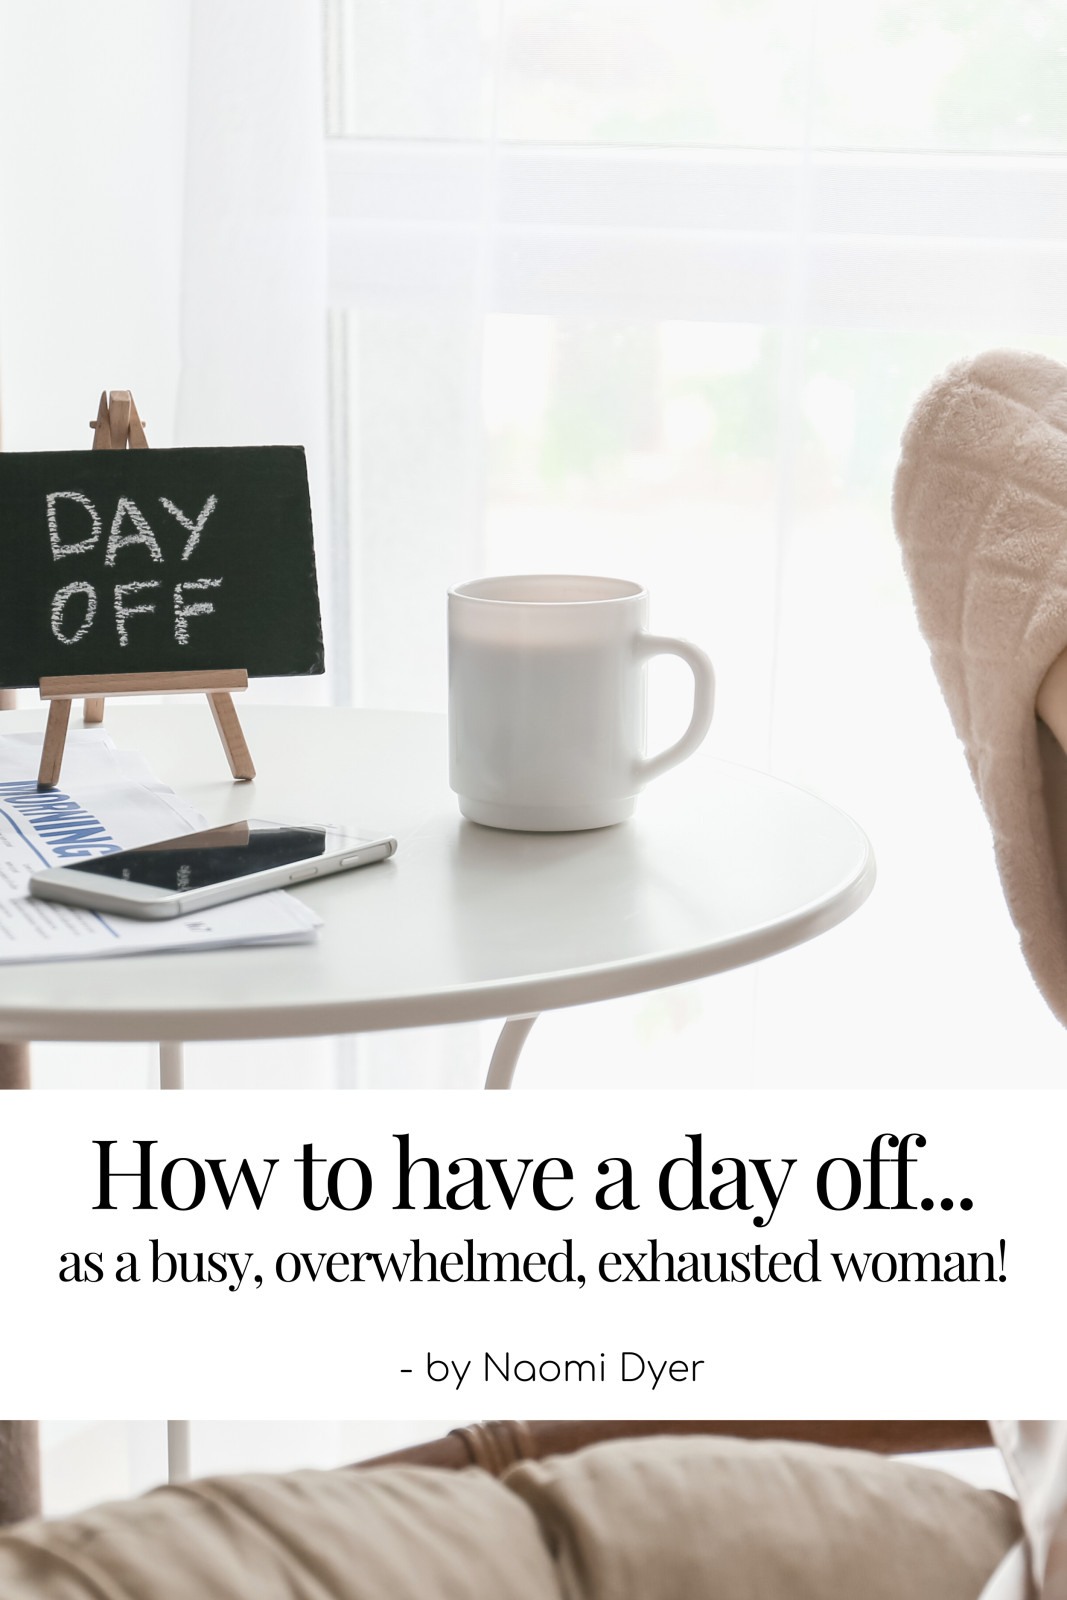 How to have a day off...as a busy, overwhelmed, exhausted woman!